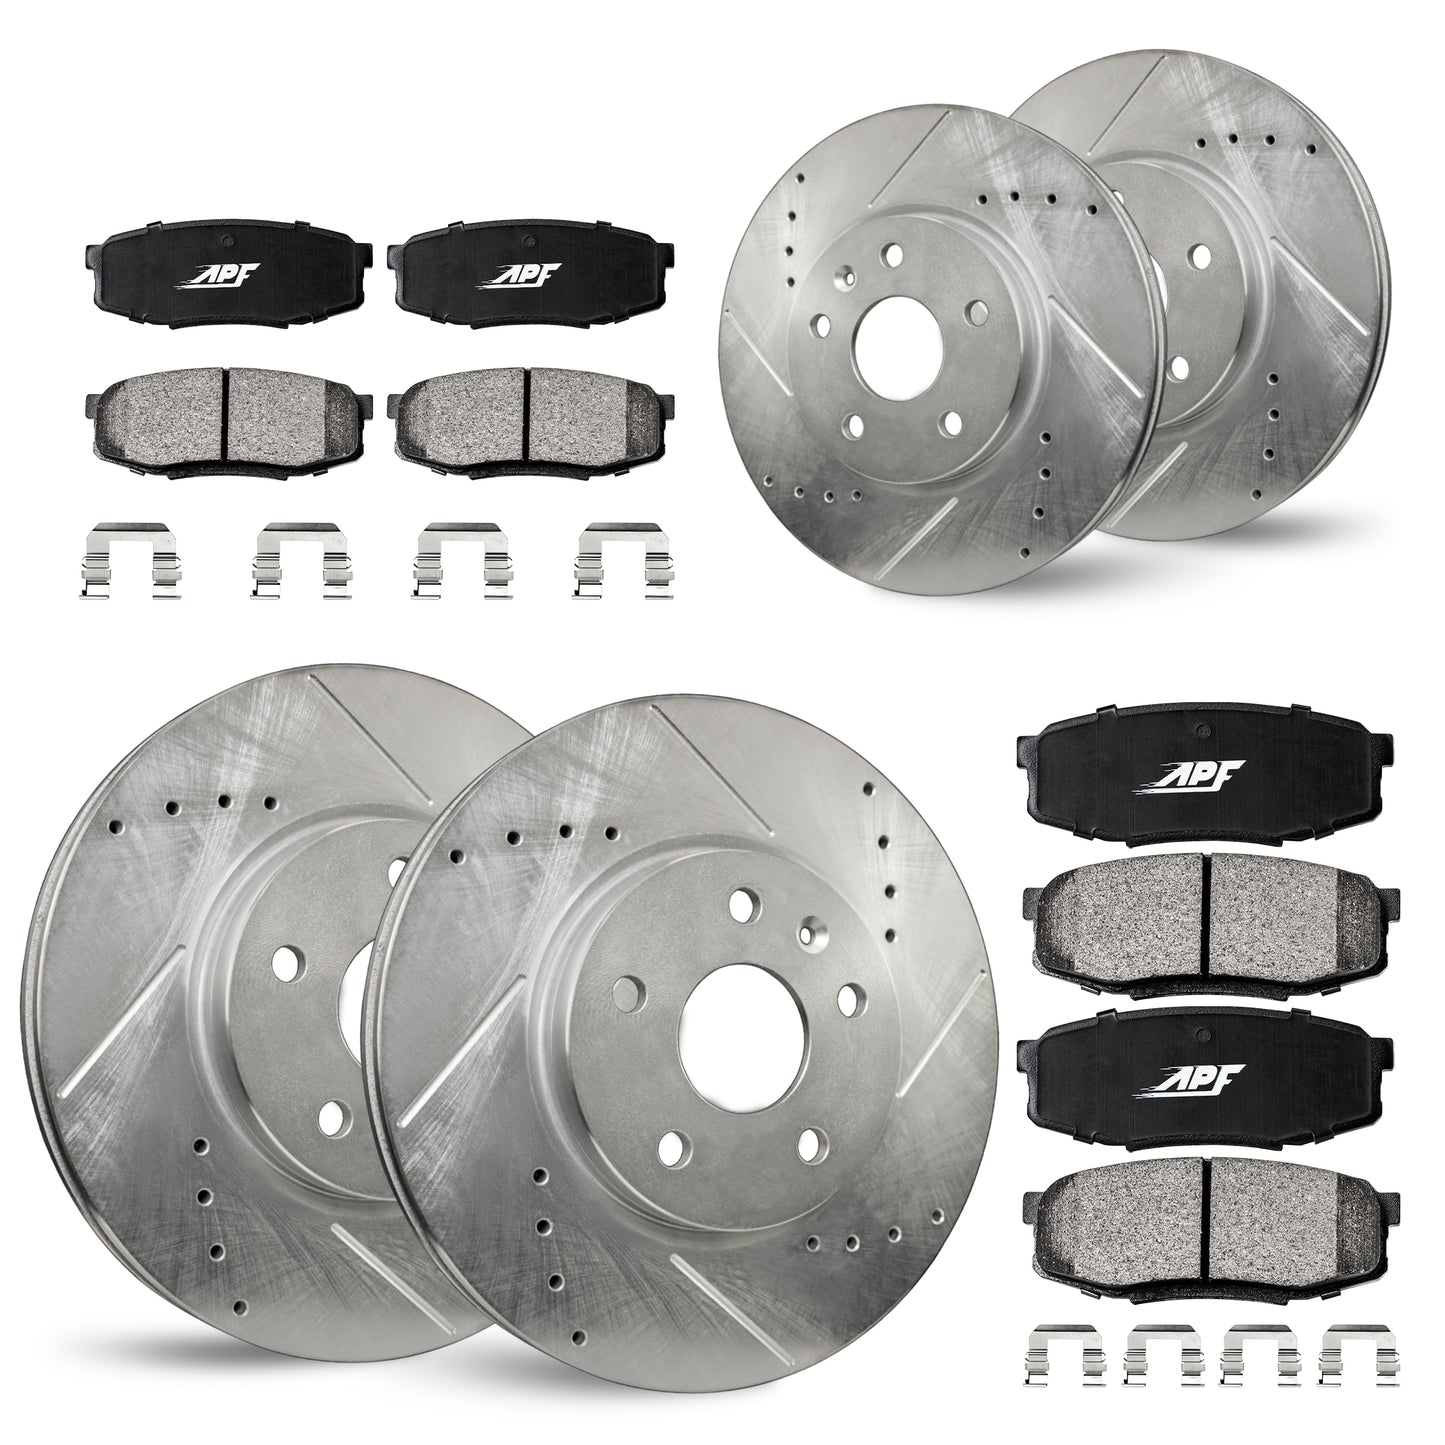 APF Full Kit compatible with Mercury Mountaineer 1997-2001 | Zinc Drilled Slotted Rotors with Ceramic Carbon Fiber Brake Pads